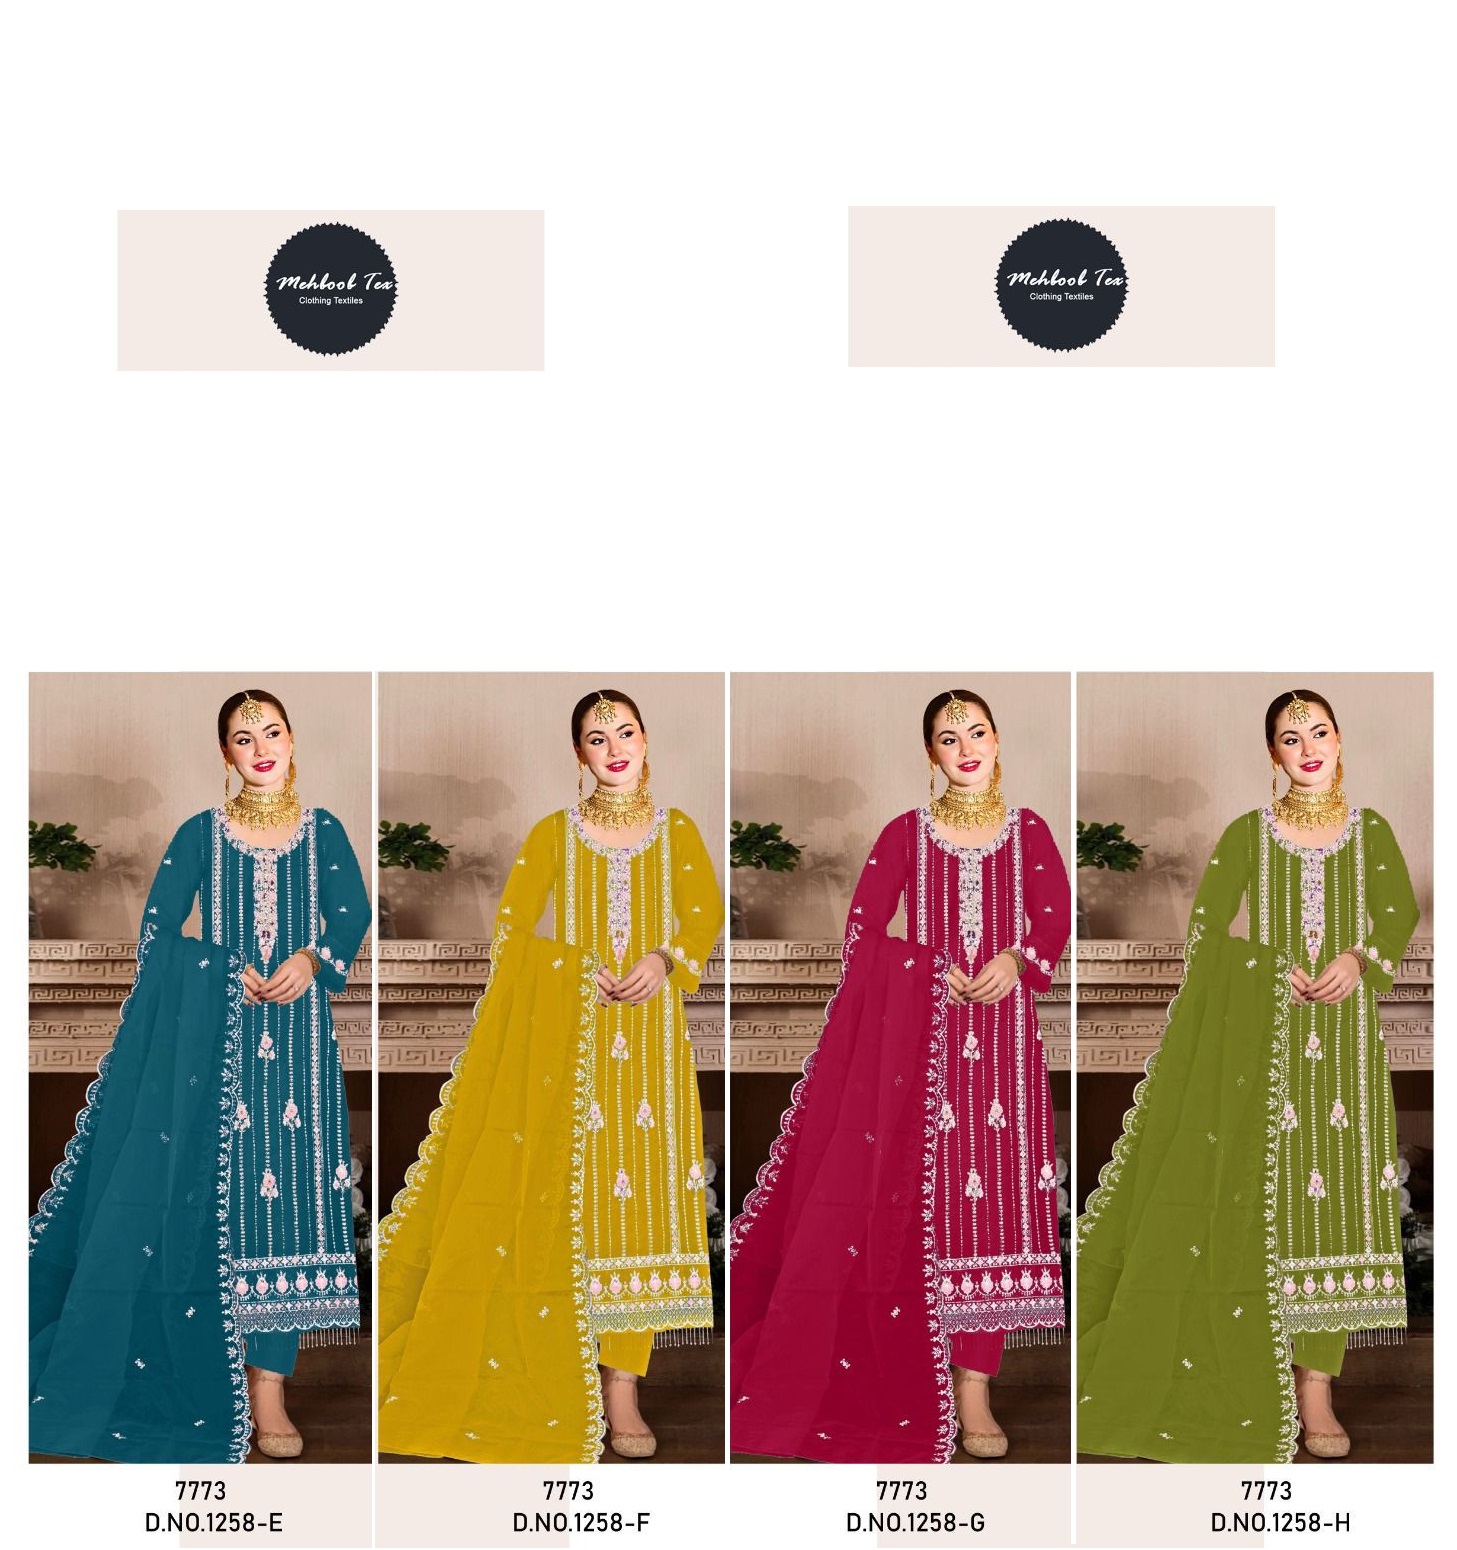 MEHBOOB TEX 1258 E TO H SALWAR SUITS IN INDIA